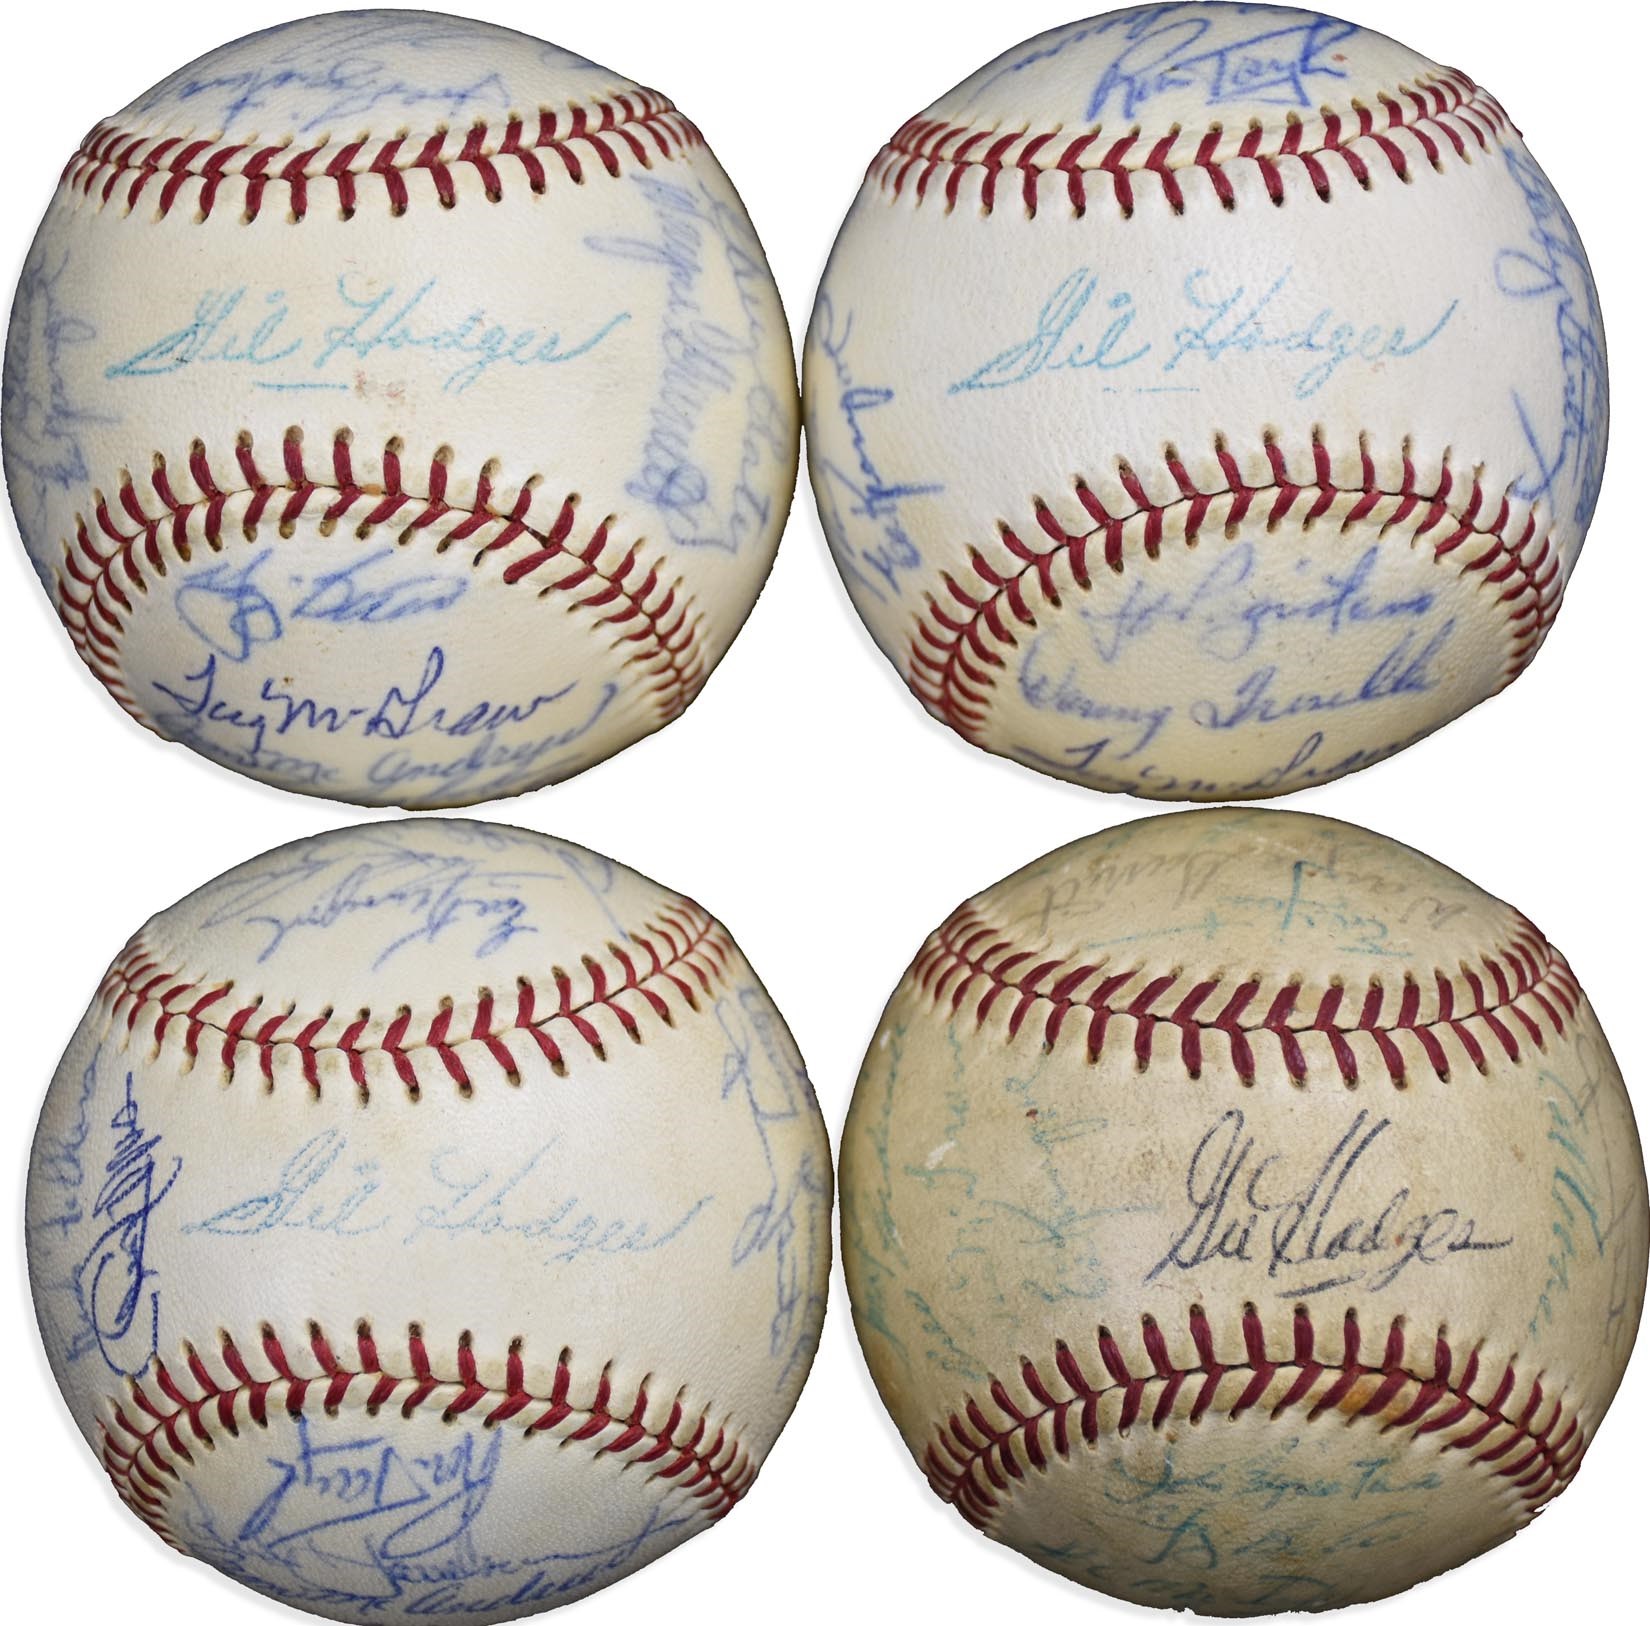 NY Yankees, Giants & Mets - 1969 World Champion & 1970 NY Mets Team-Signed Baseballs - Gifted by Ron Taylor (4)